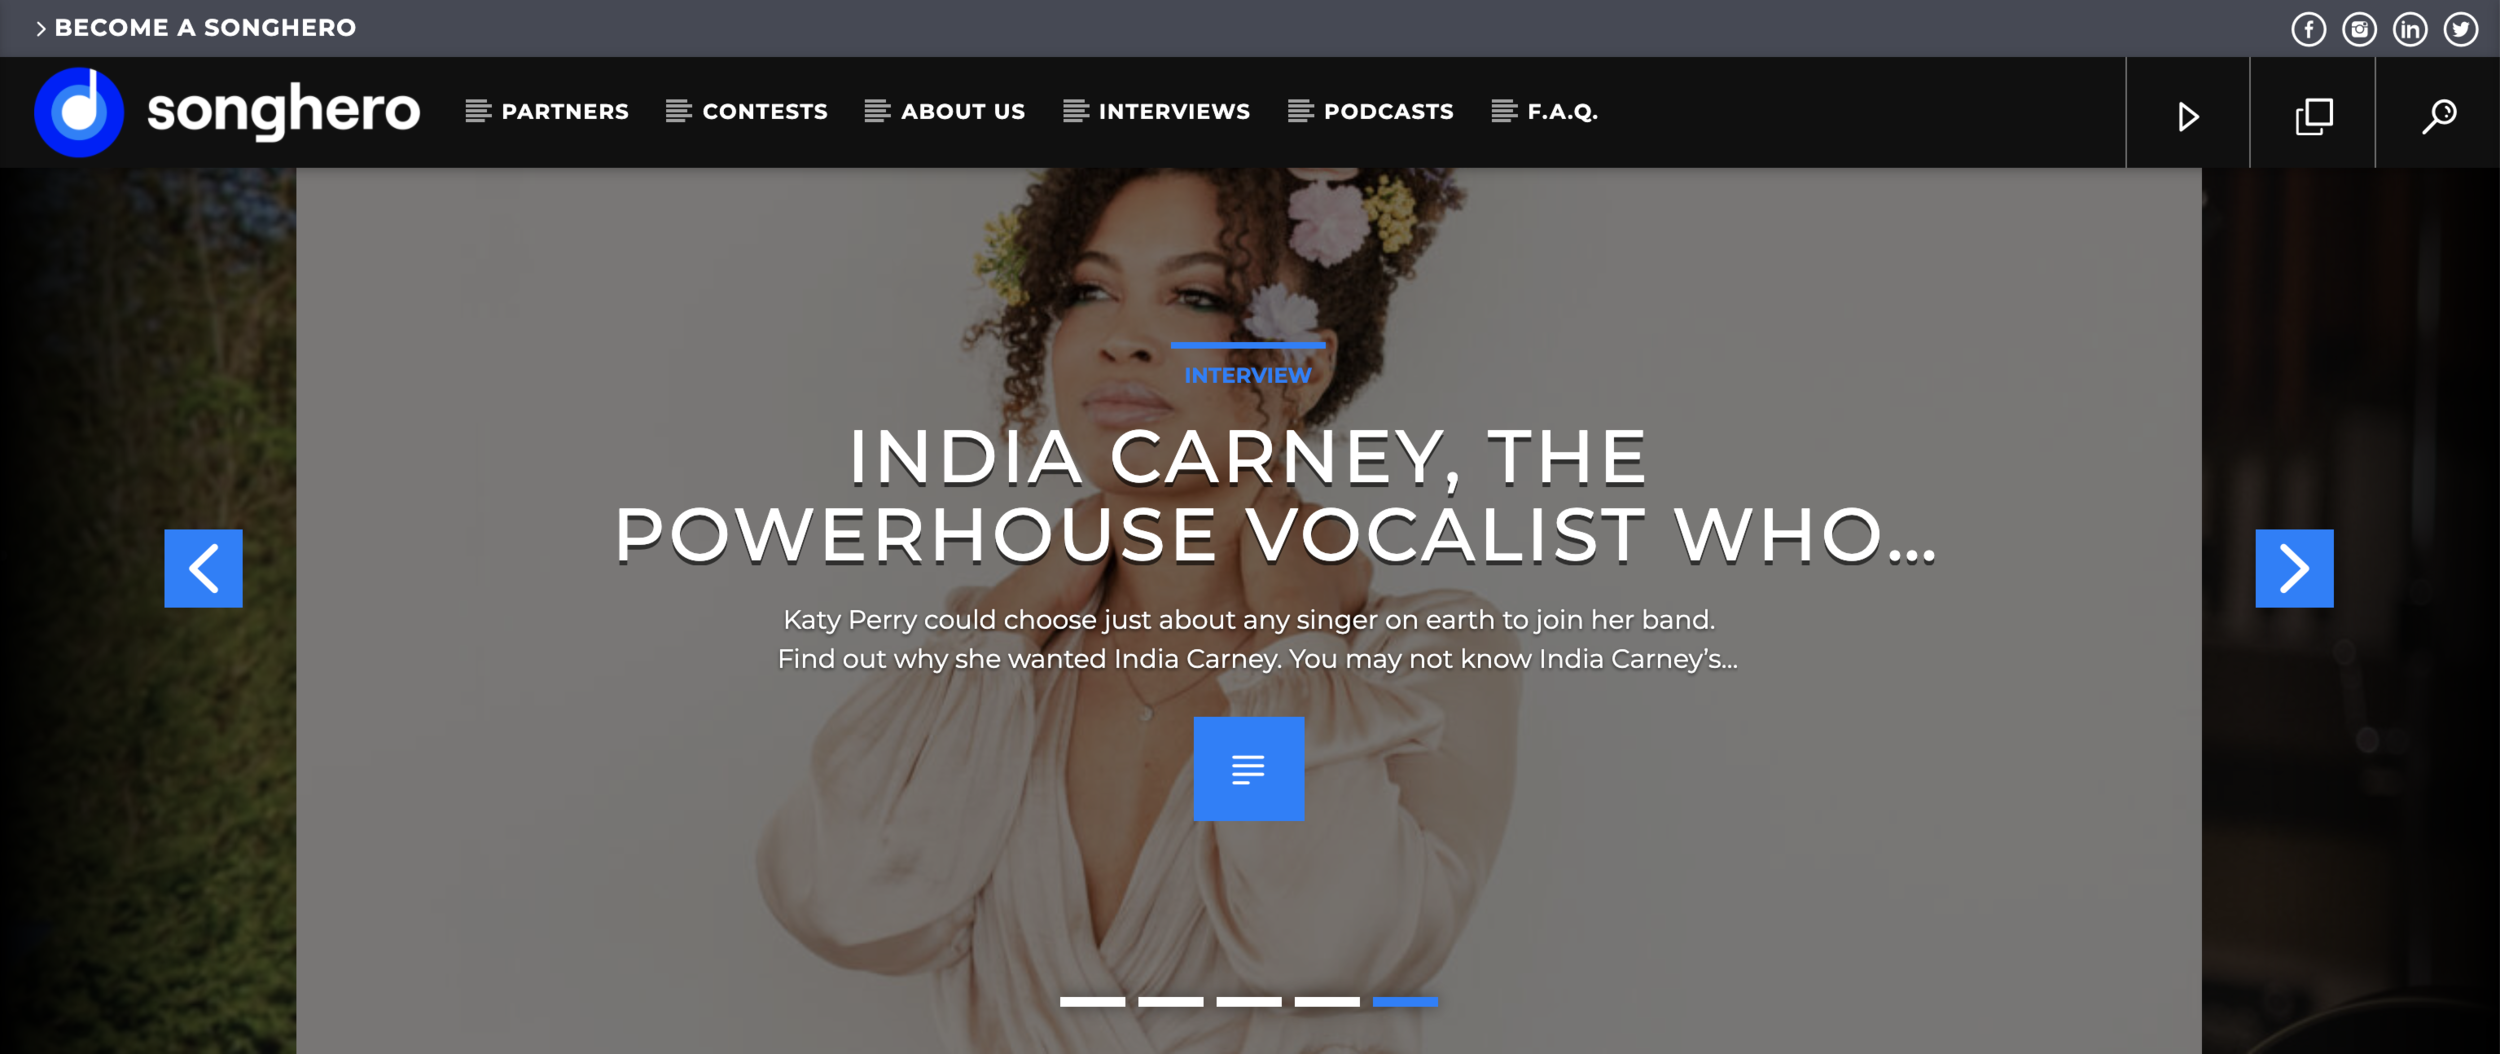 songhero-india-carney.png